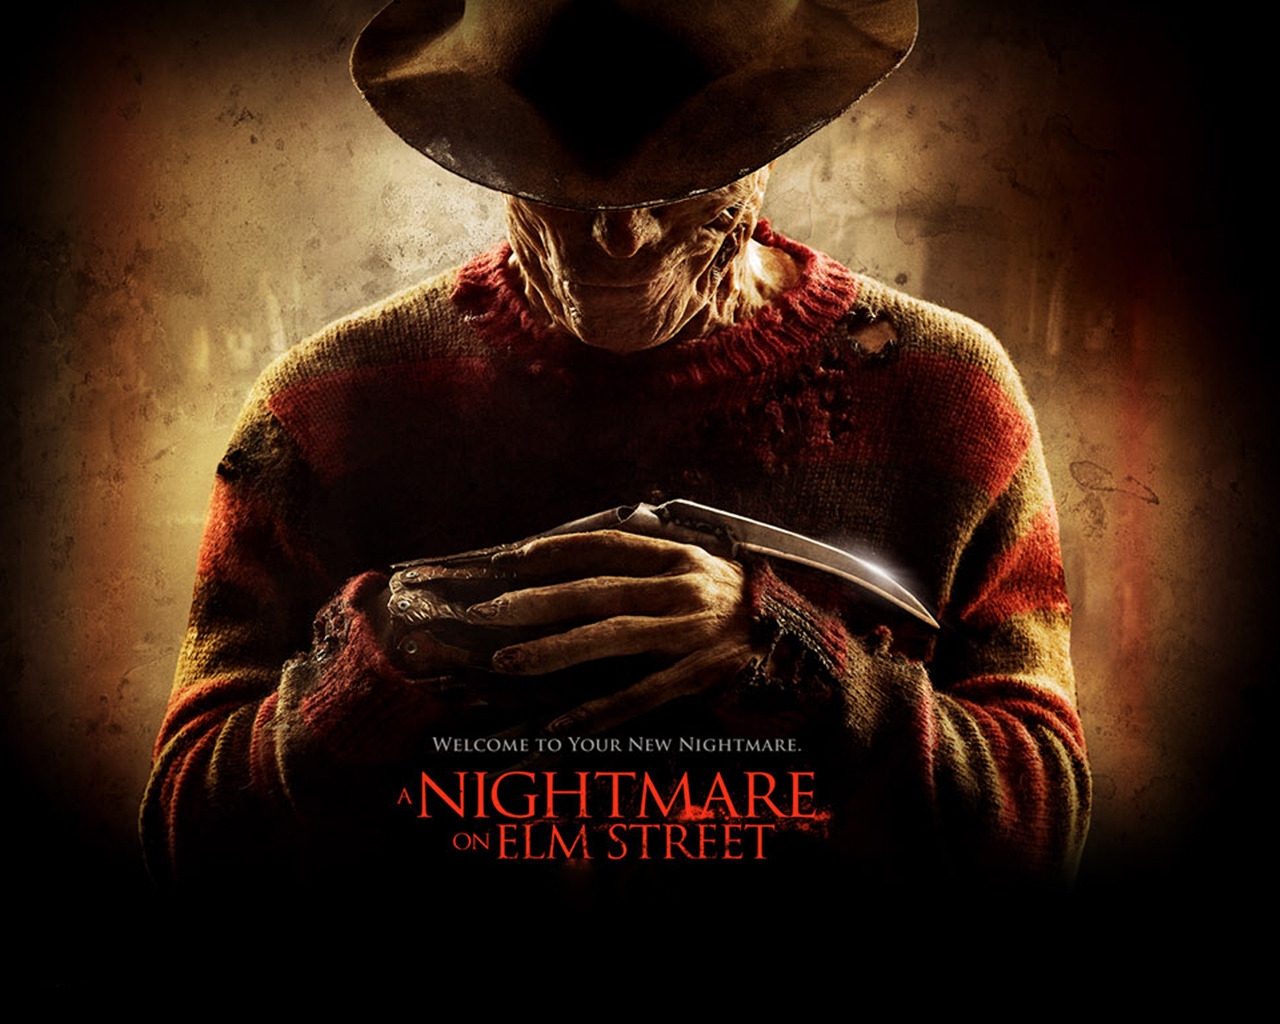 A Nightmare on Elm Street for 1280 x 1024 resolution